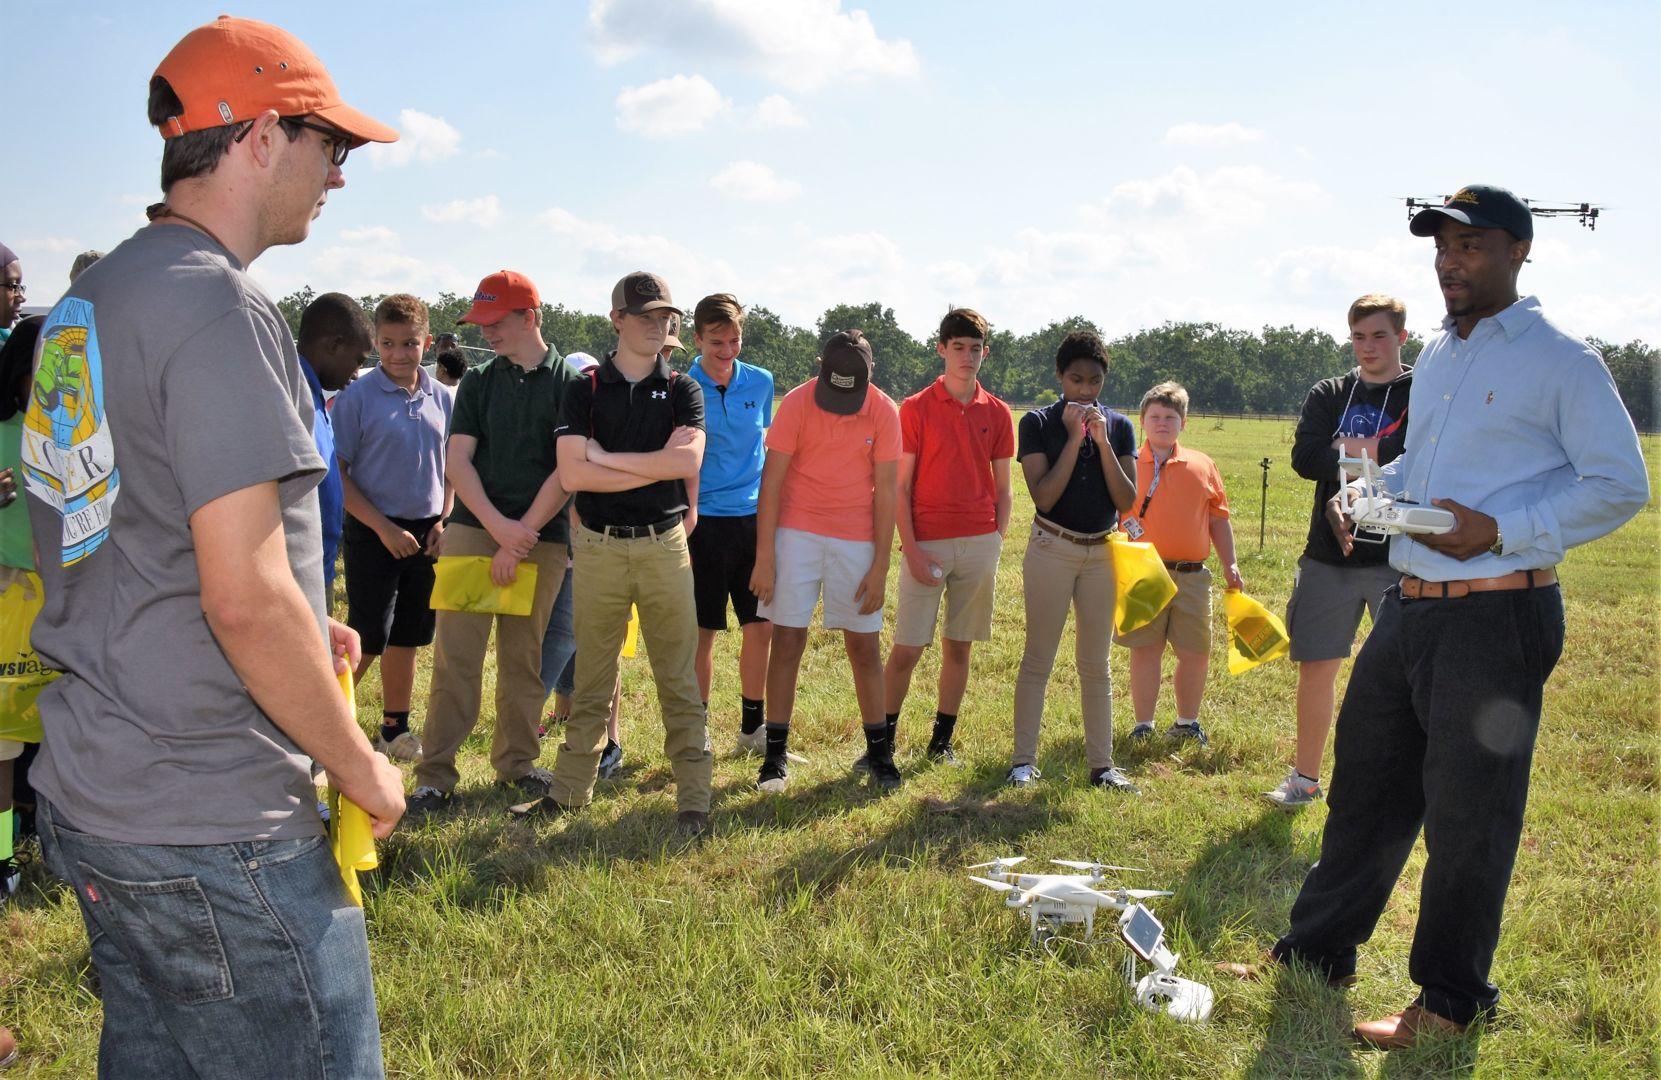 Dr. Cedric Ogden (far right), a Fort Valley State University Extension engineer and assistant professor, demonstrates the use of an unmanned aerial vehicle in research and Extension outreach efforts to Northside High School students and other spectators during Agricultural Field Day on Sept. 14.